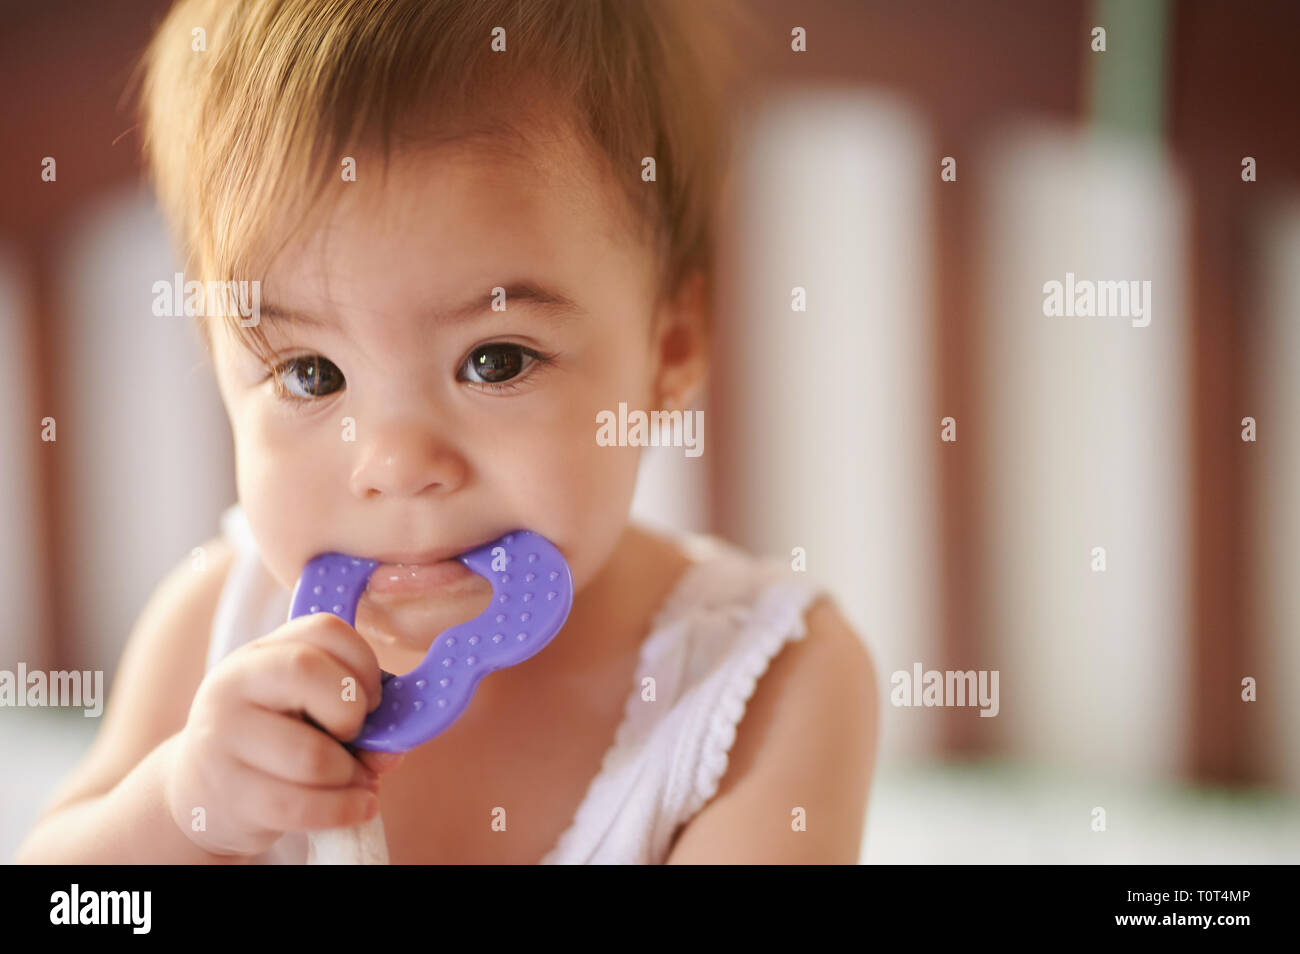 Baby girl sucking toy. Growing teeth in small kid Stock Photo